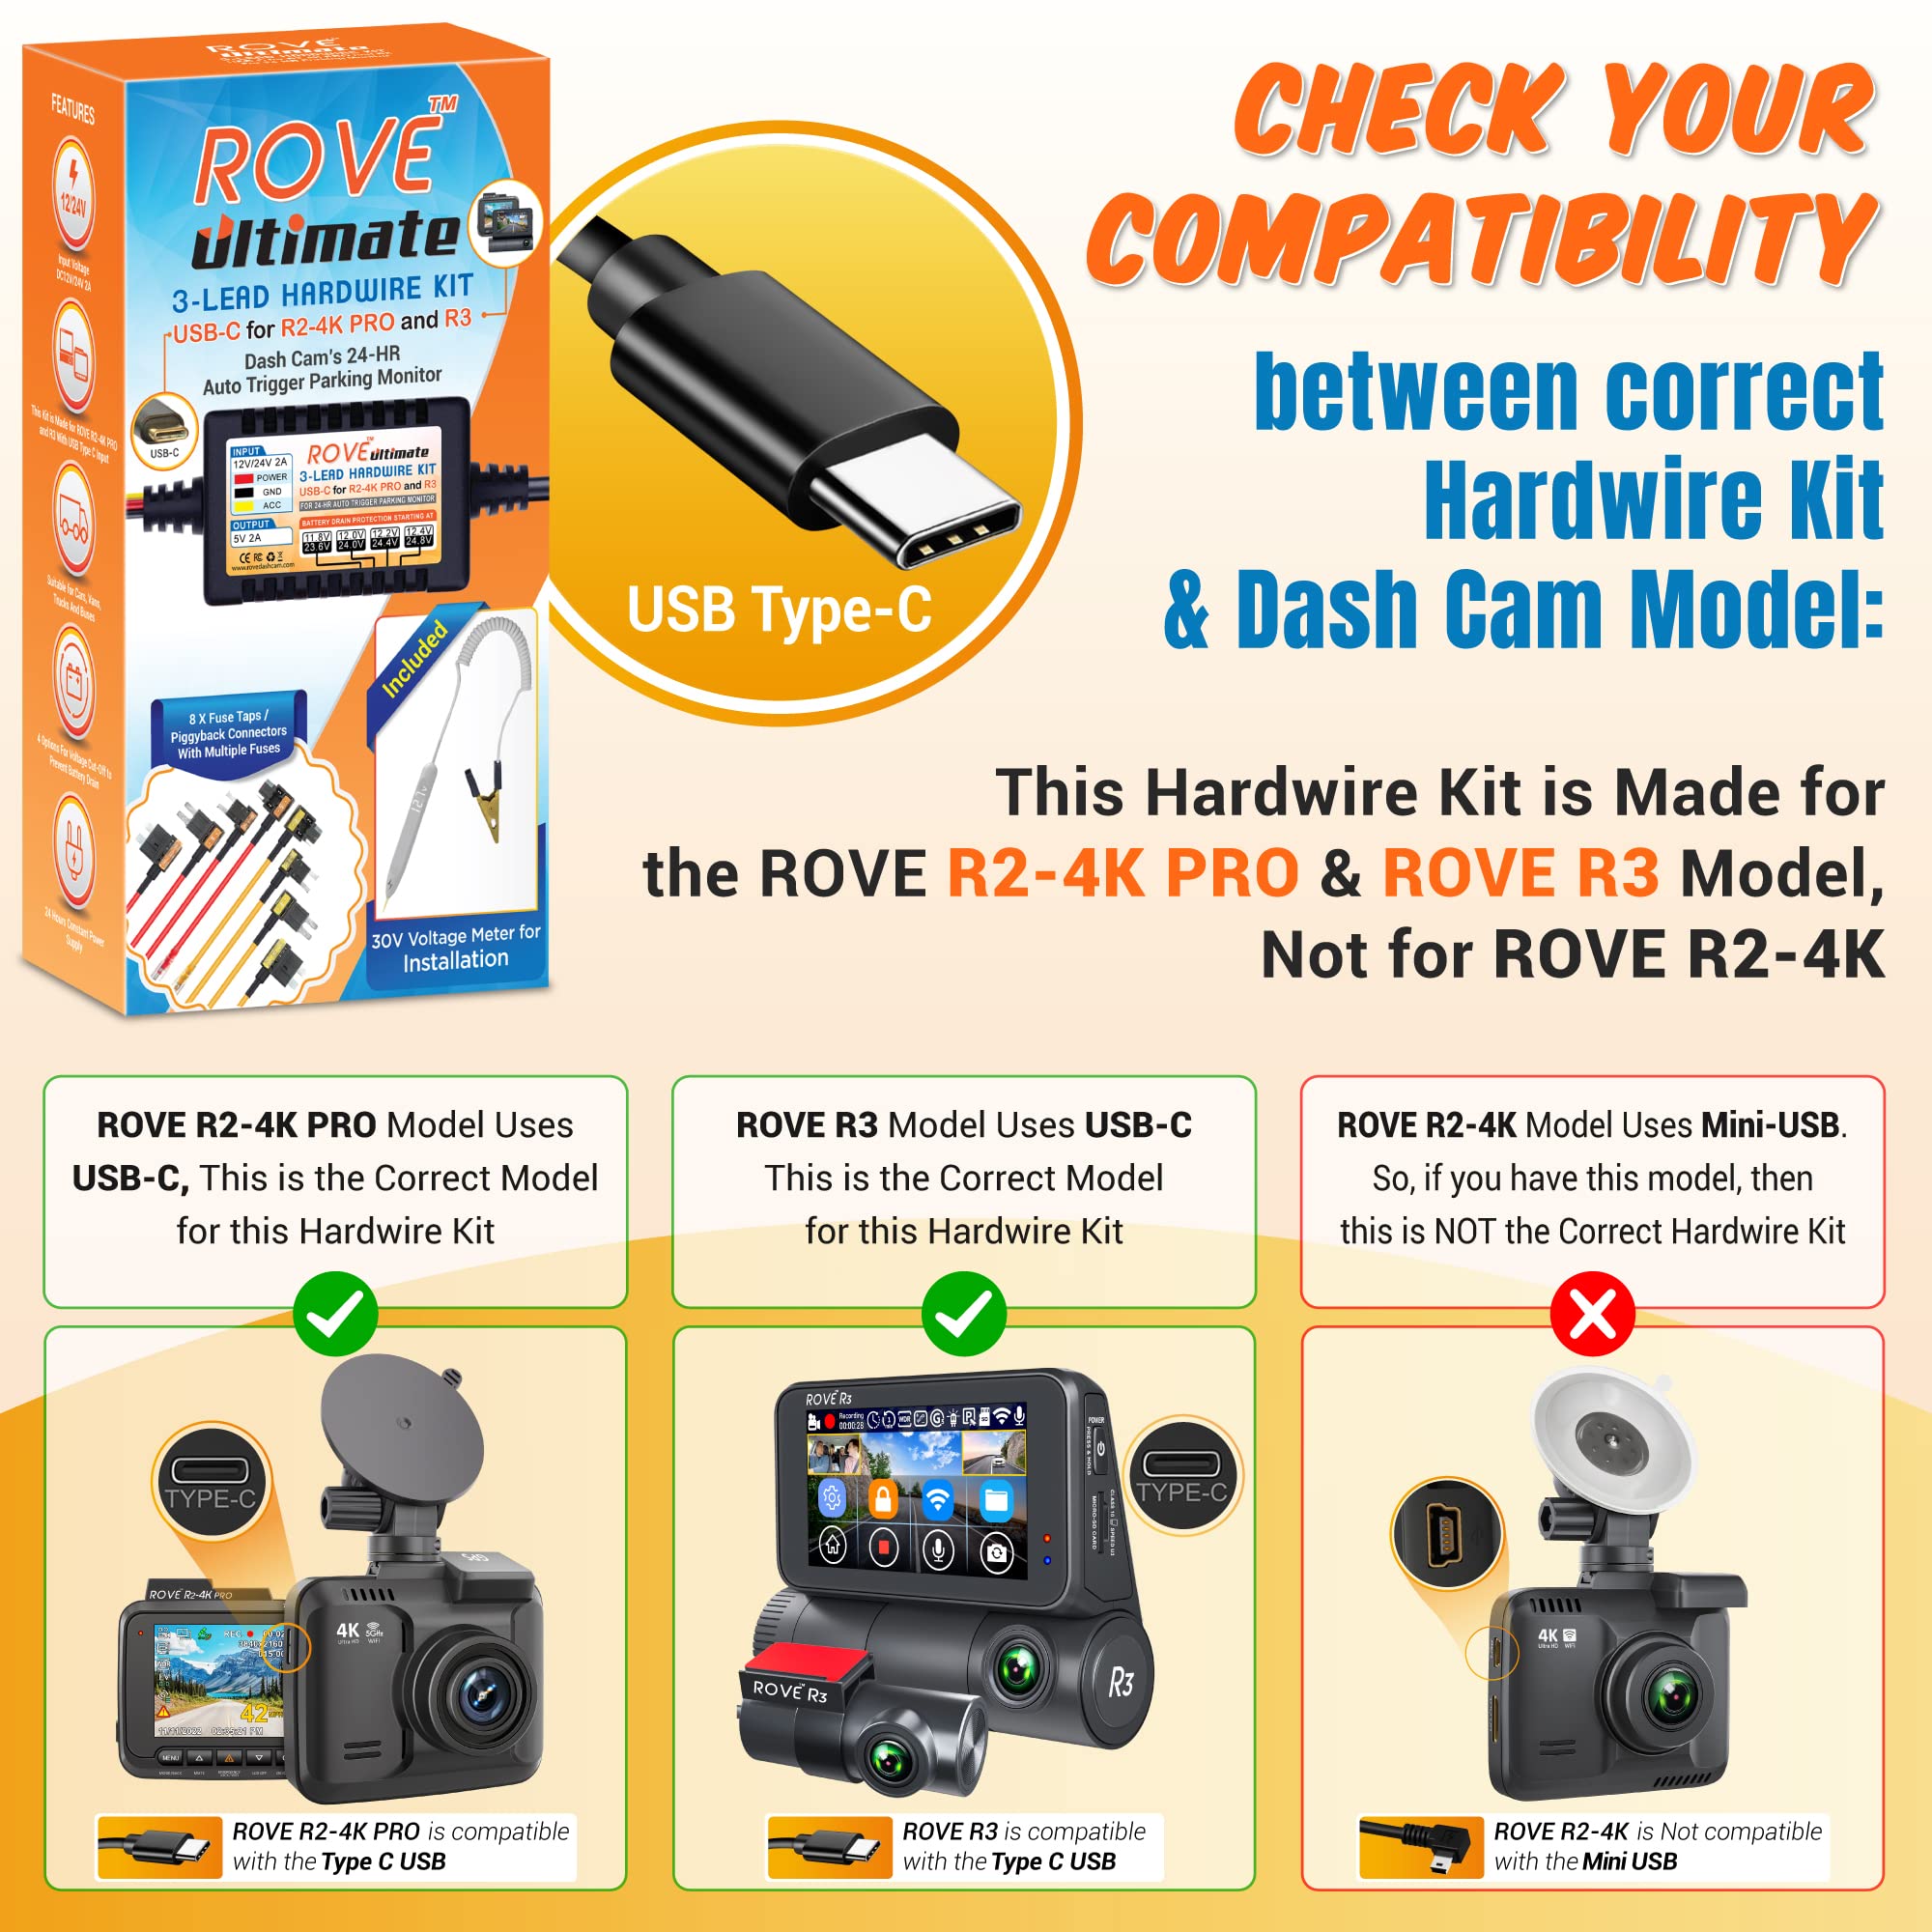 Dash Cam Hardwire Kit | USB Type C | for ROVE R3 and R2-4K PRO Dash Cam Models